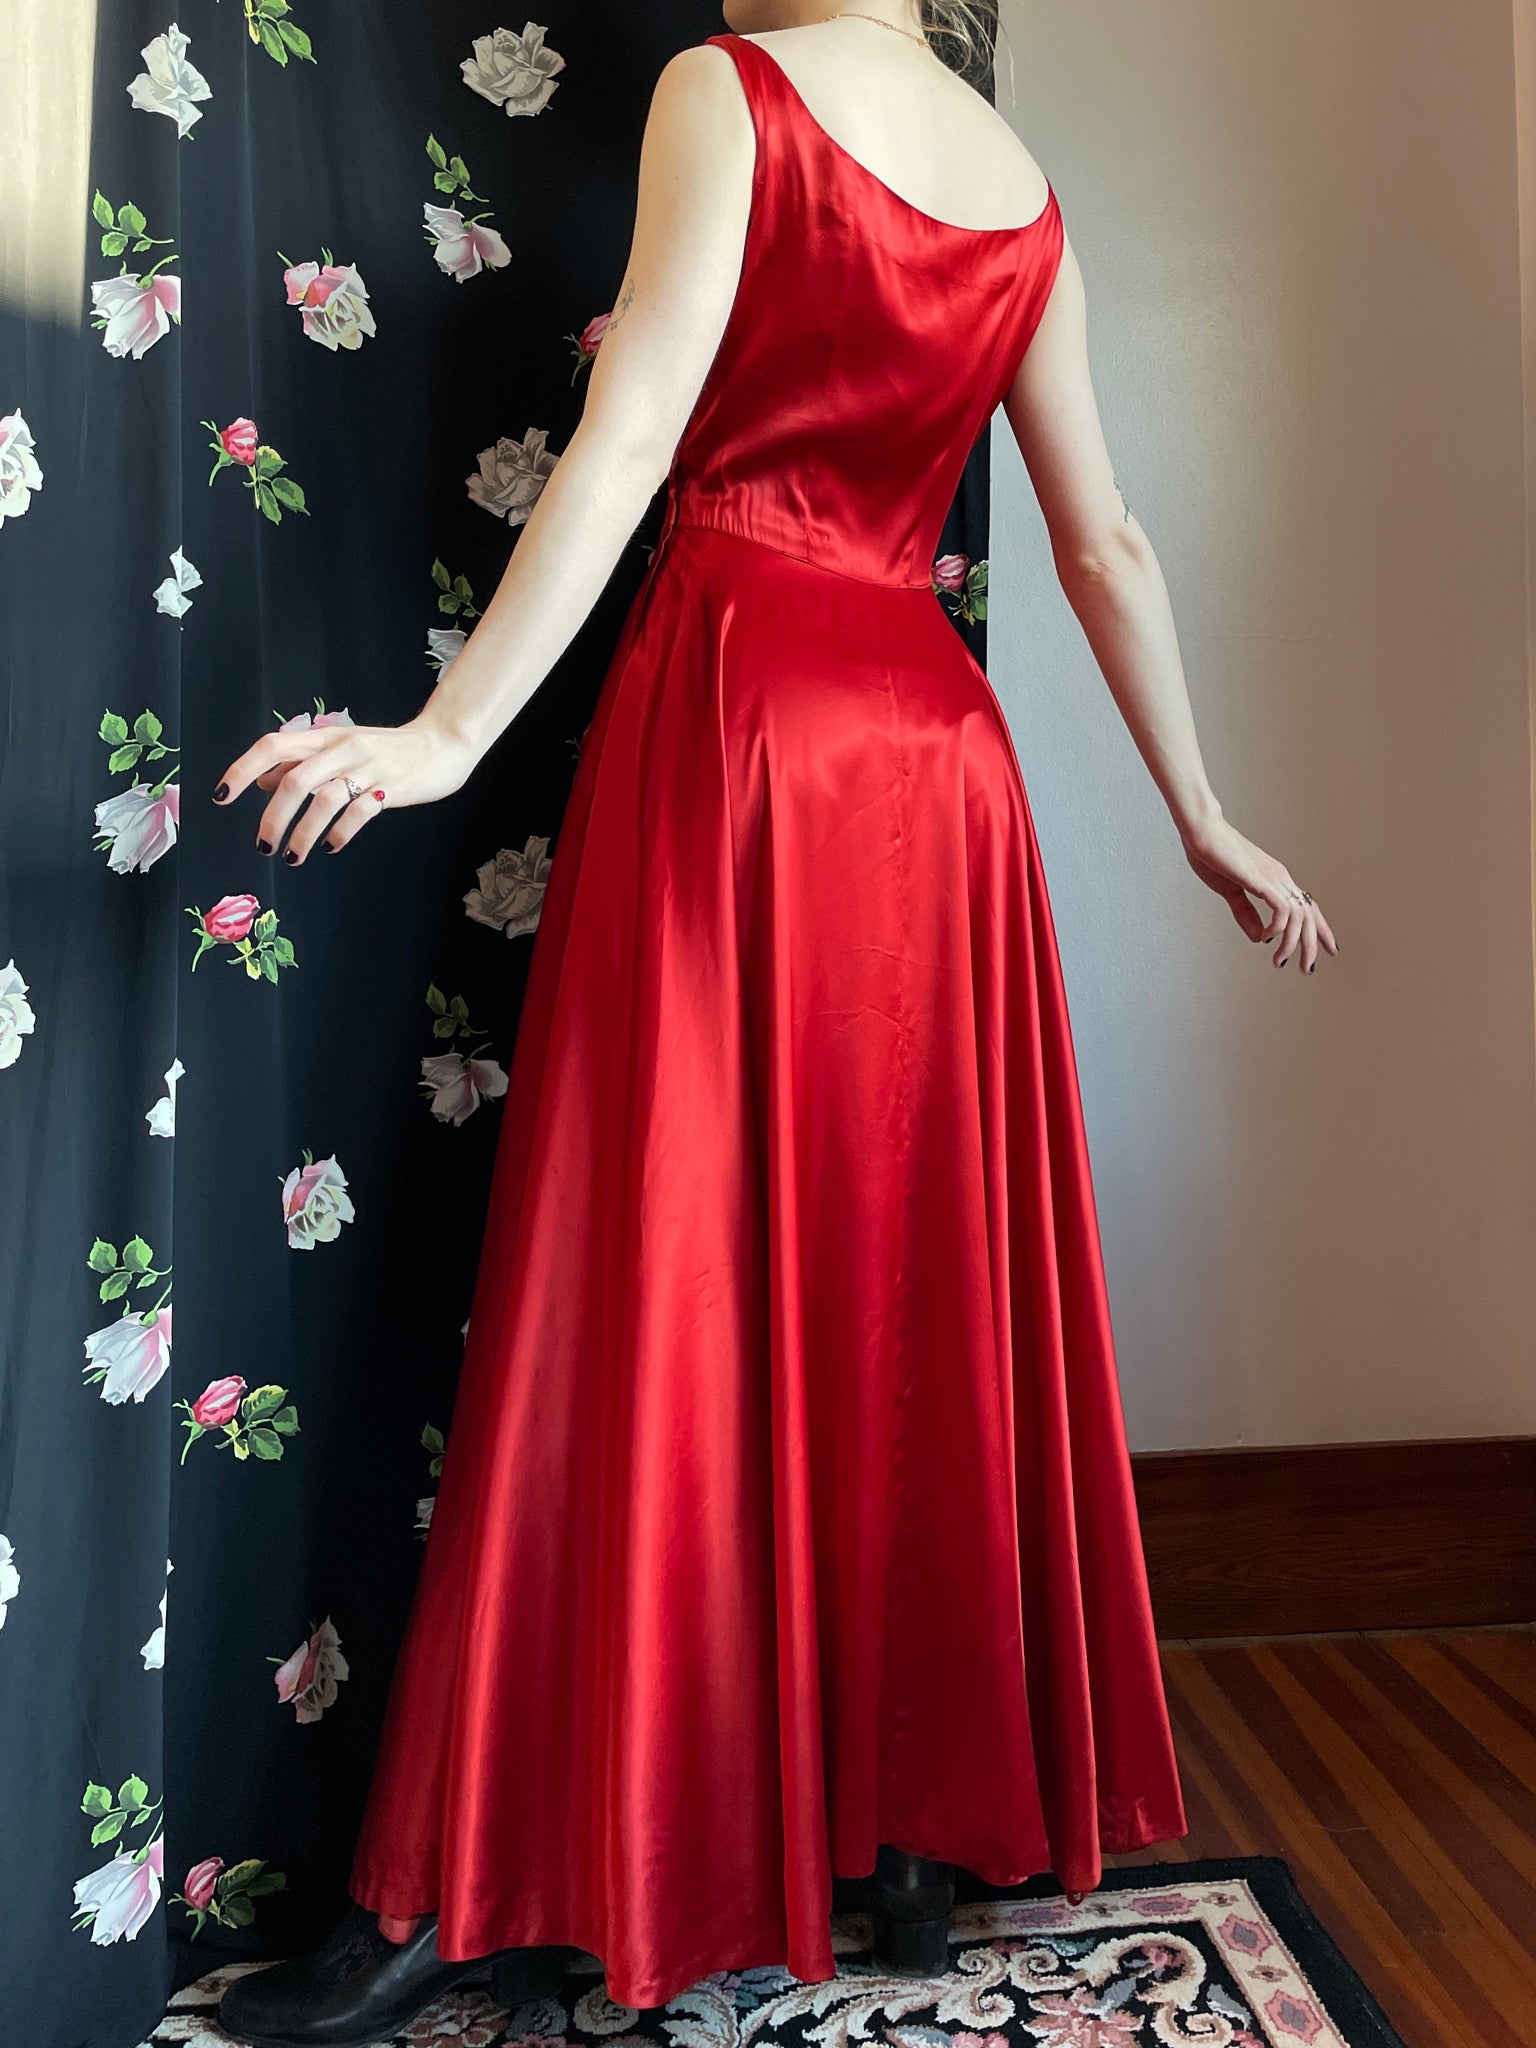 1950s Red Satin Dress Gown Full Circle